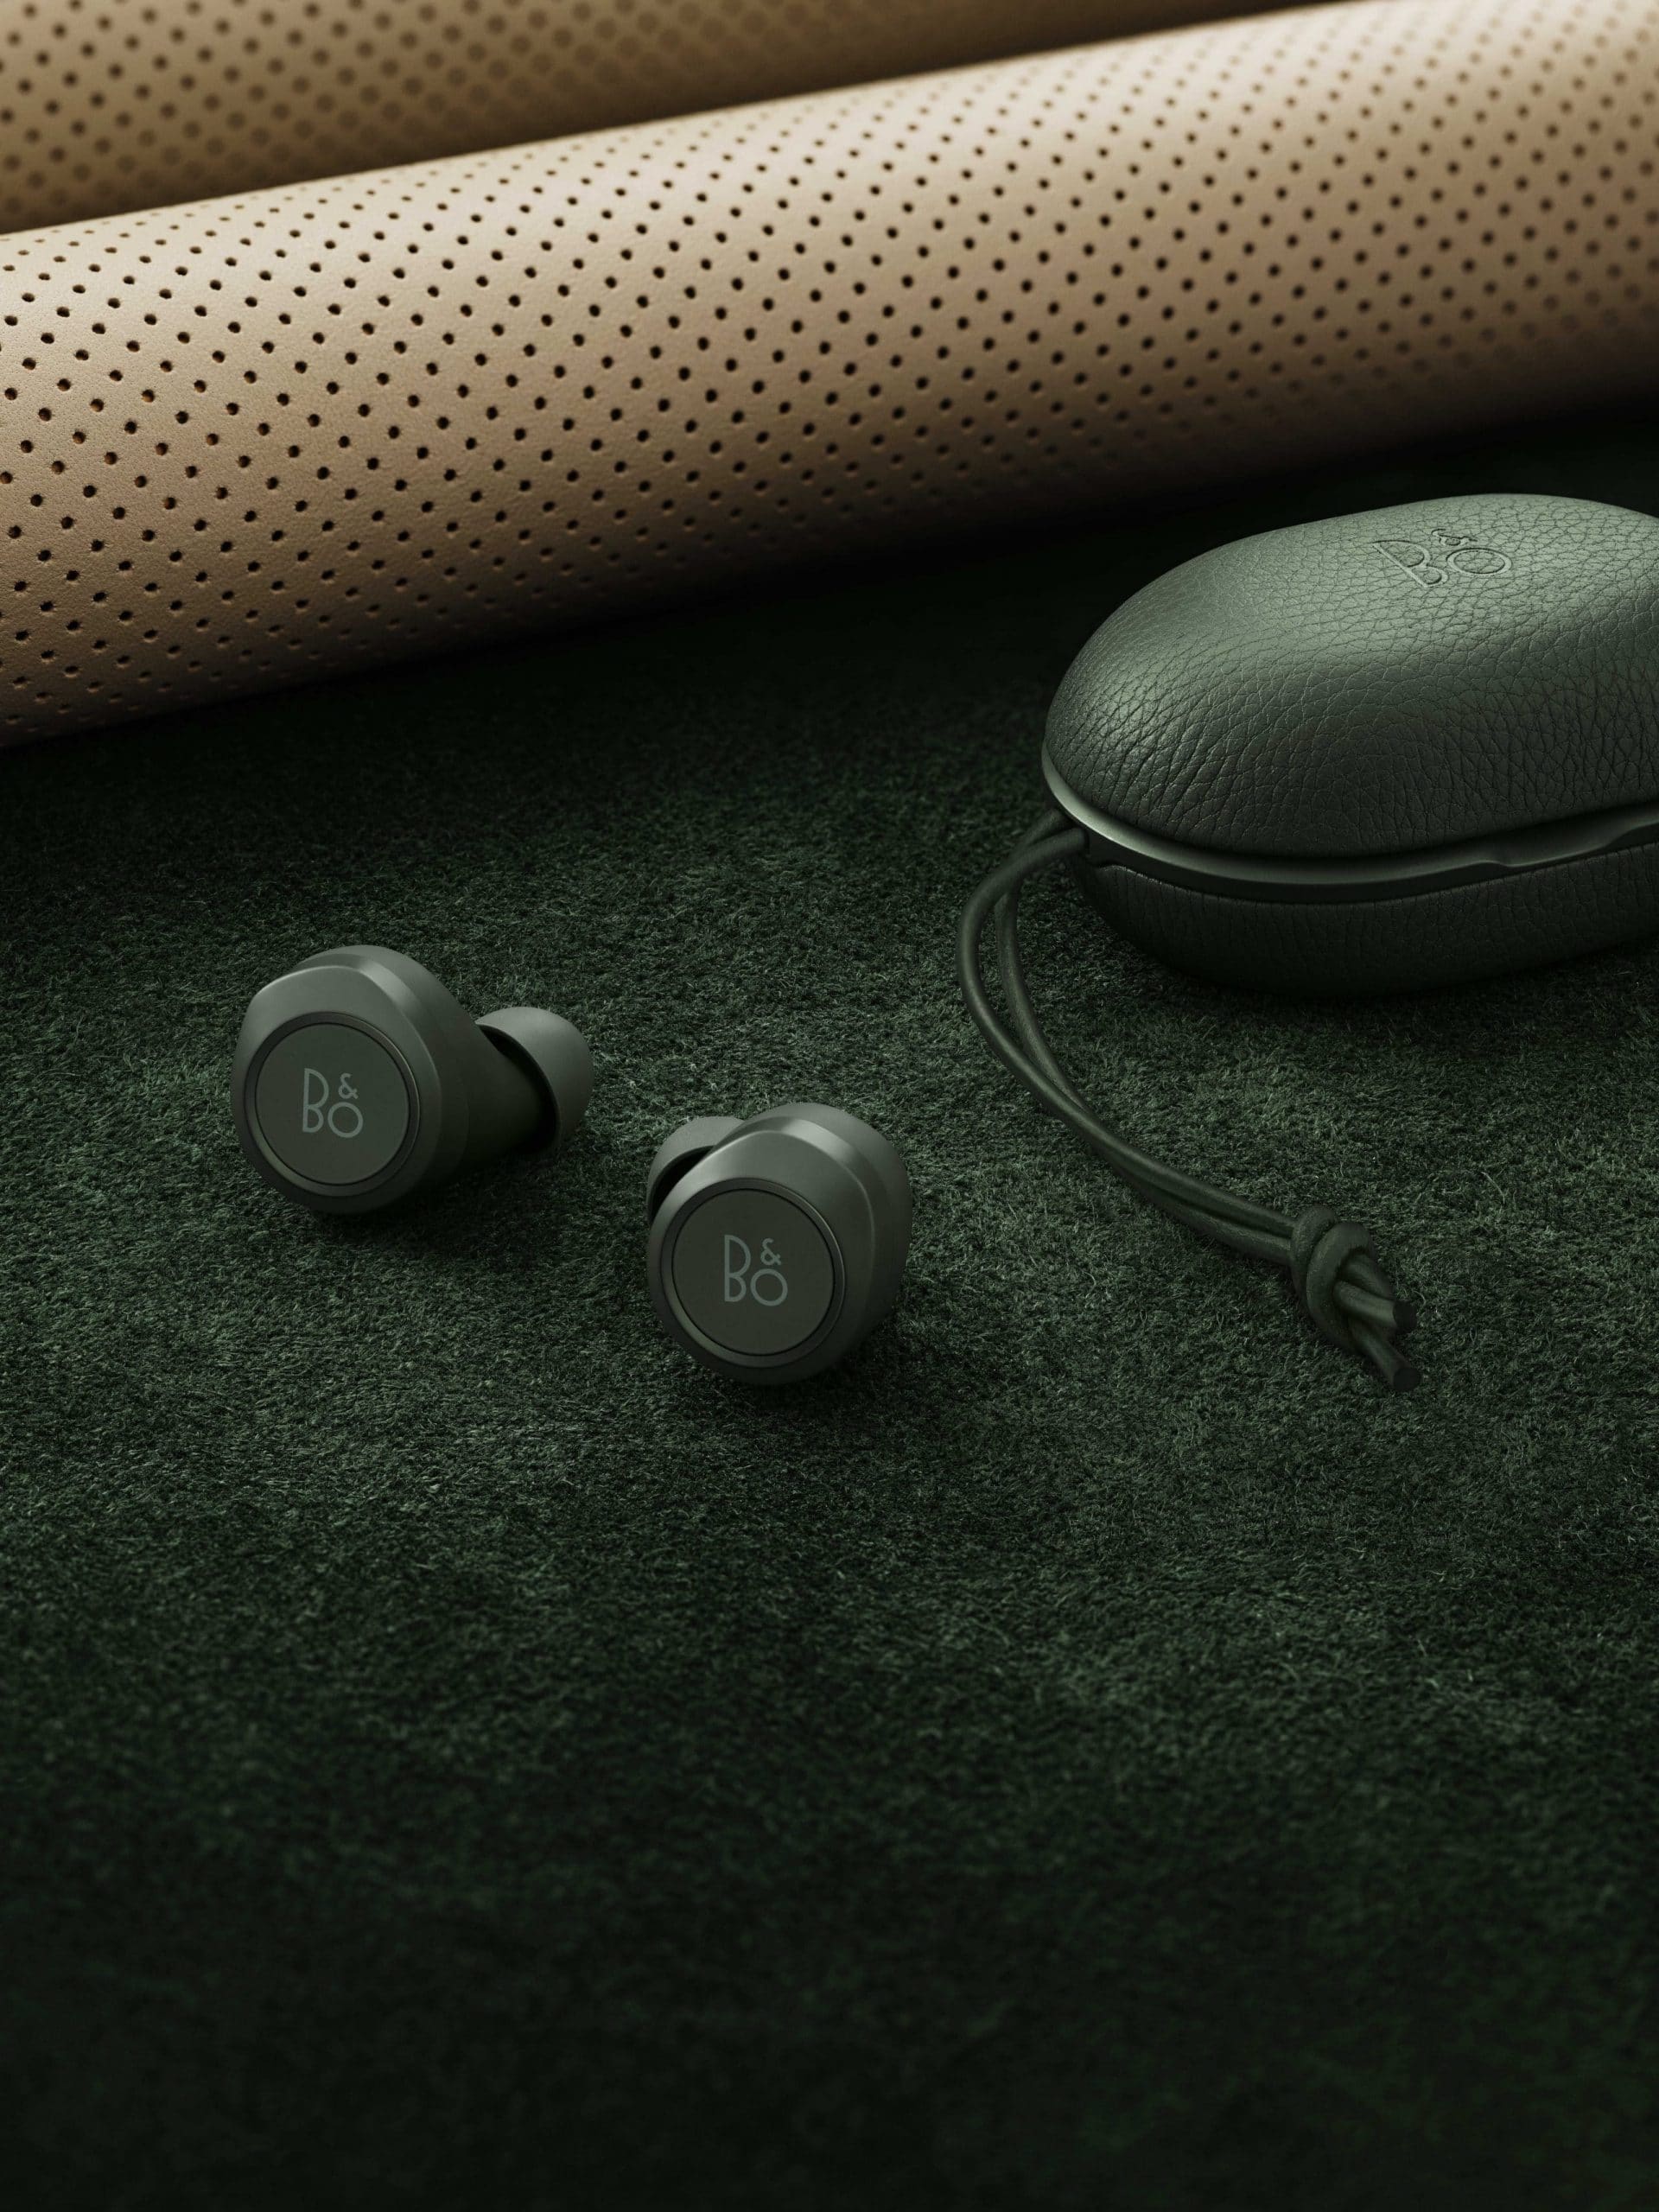 Beoplay E8 Racing Green: The Most Stylish Earphones Around